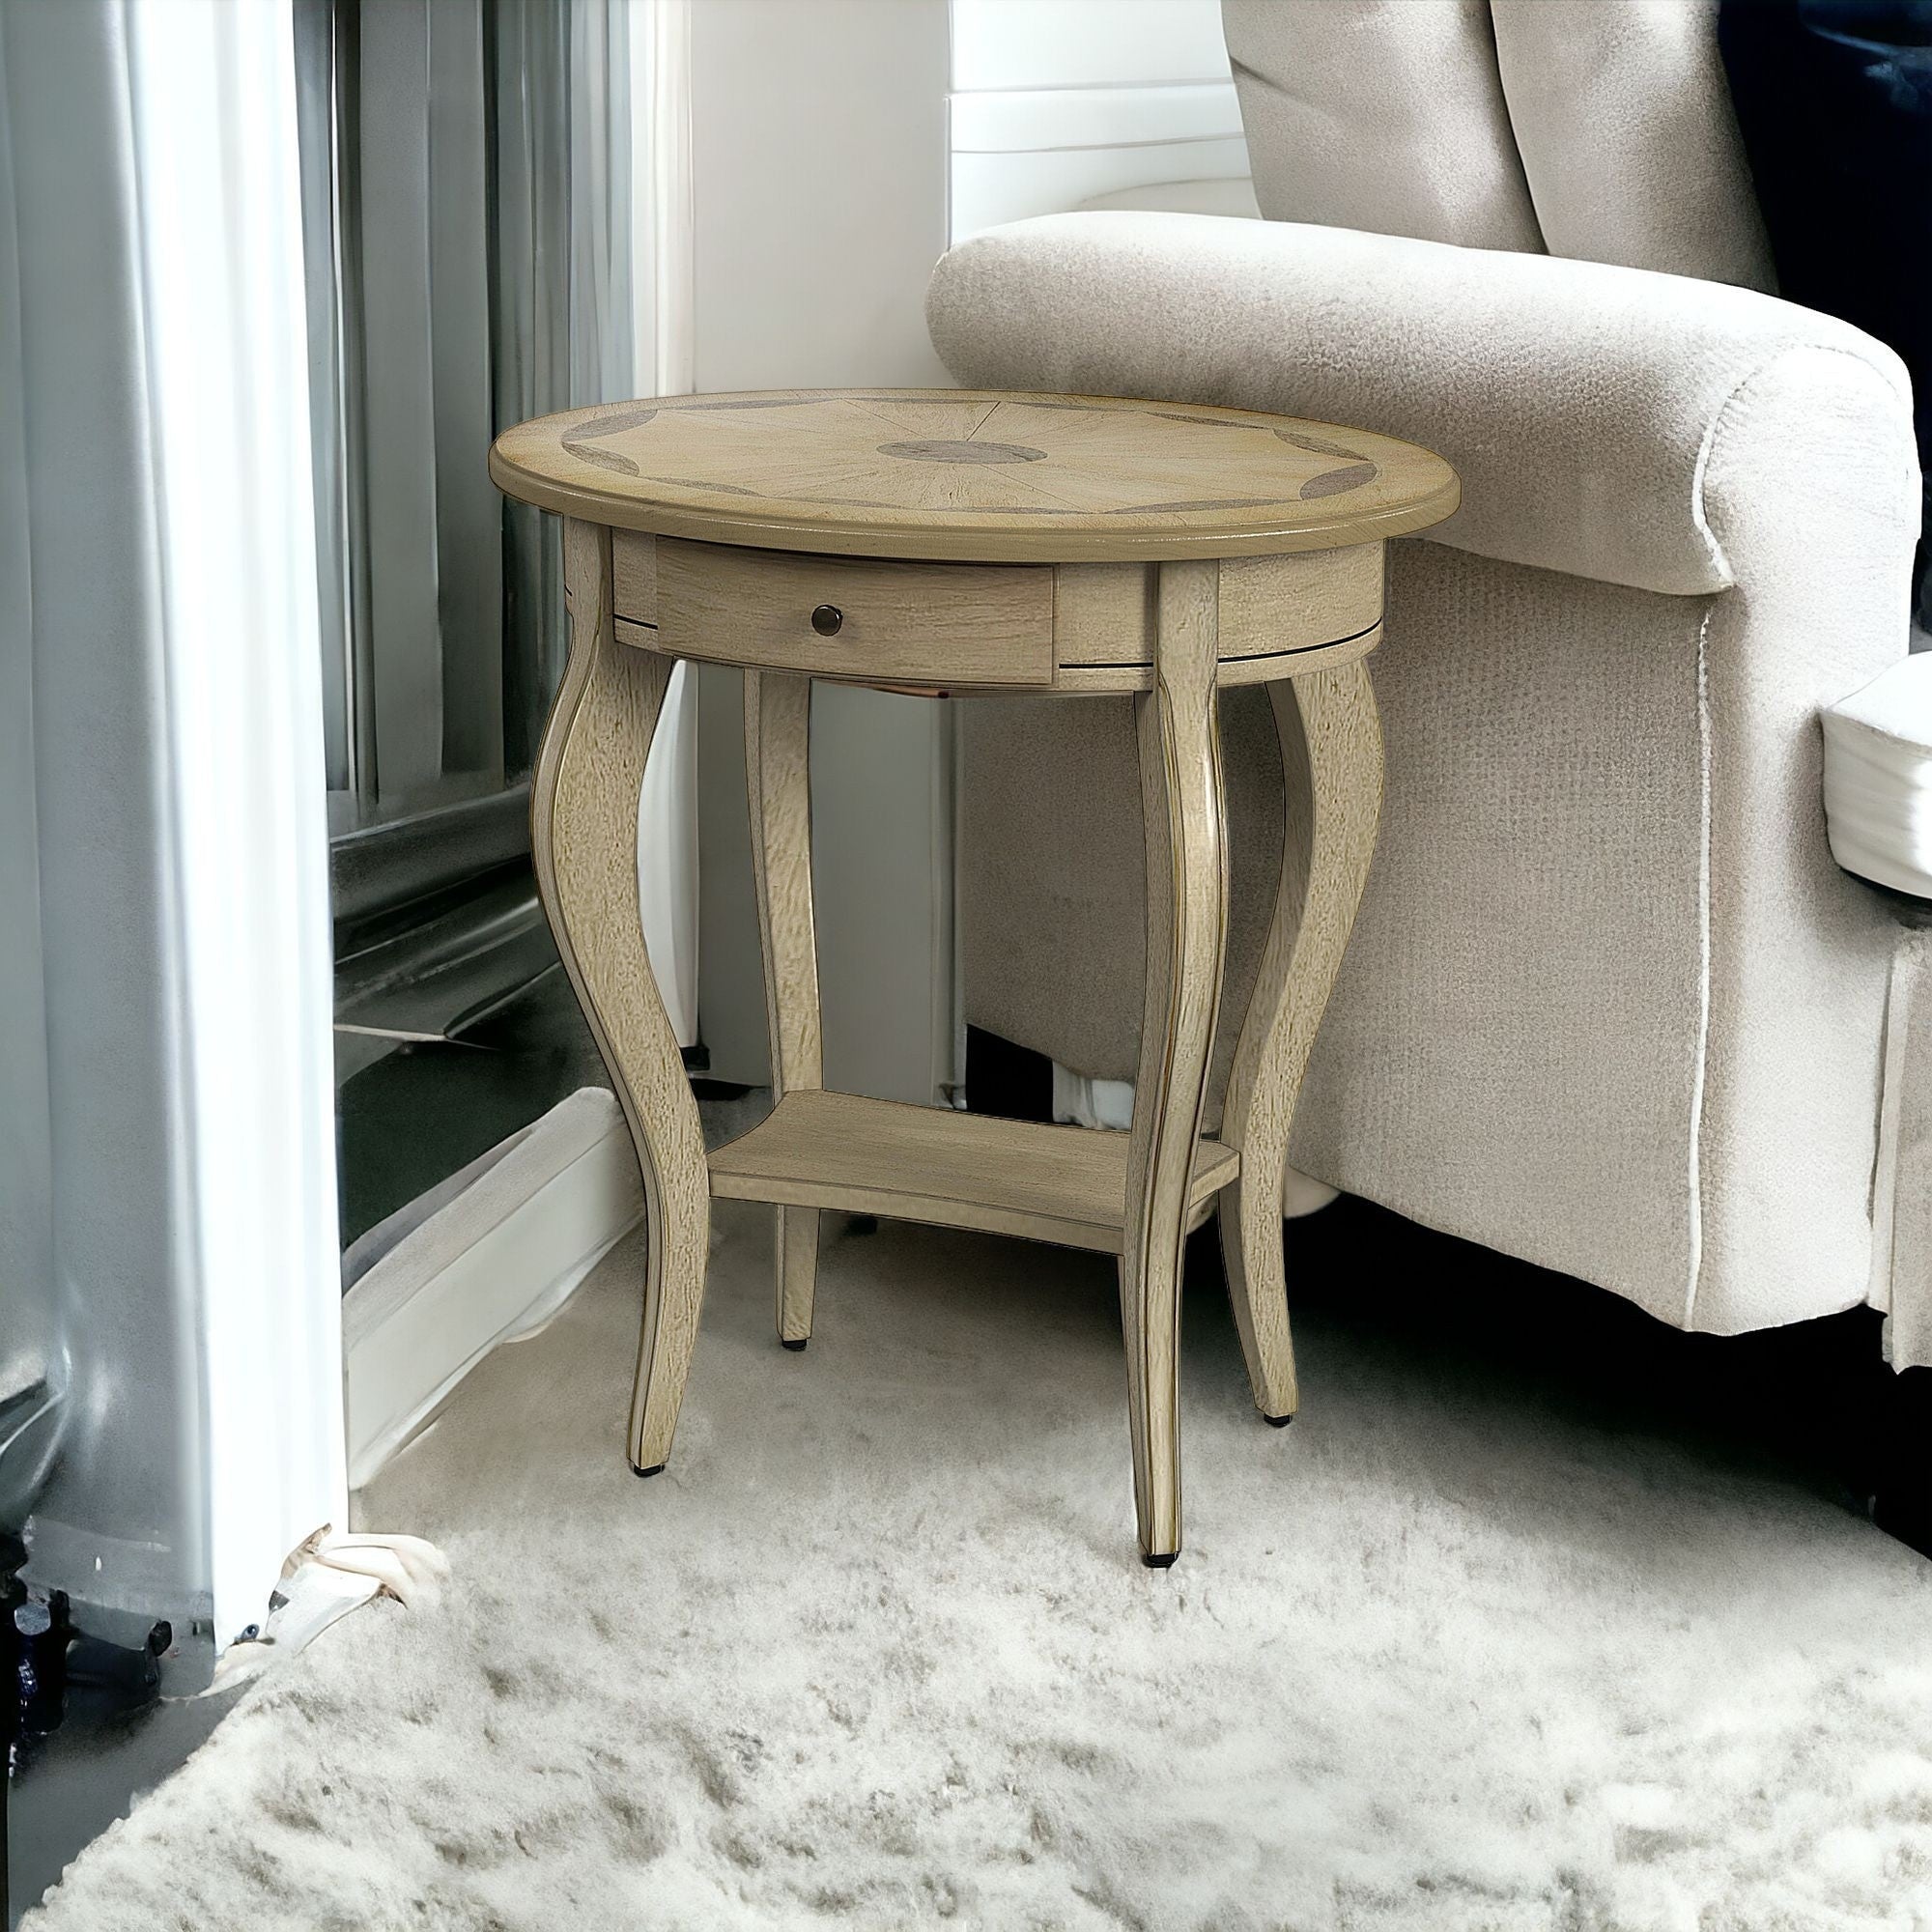 26" Beige Manufactured Wood Oval End Table With Drawer And Shelf